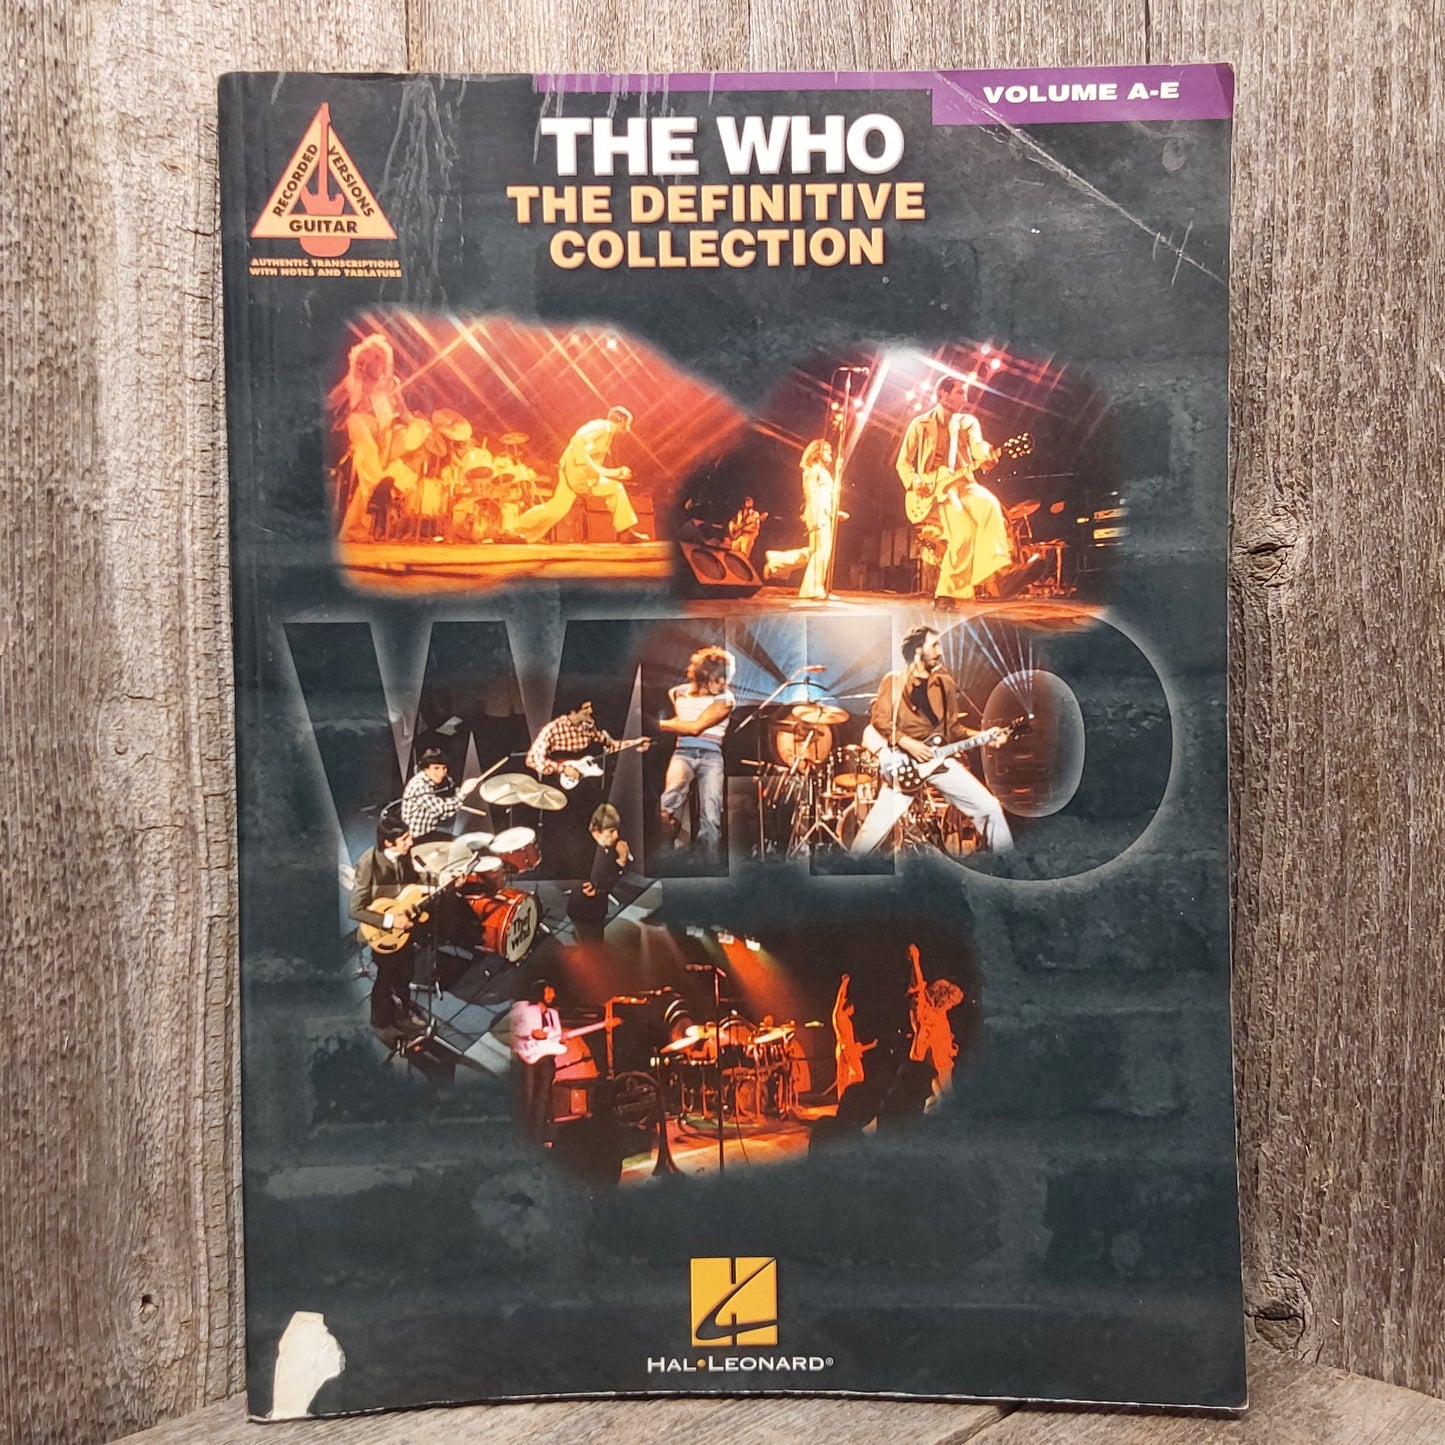 The Who The Definitive Collection Vol A-E songbook (used)